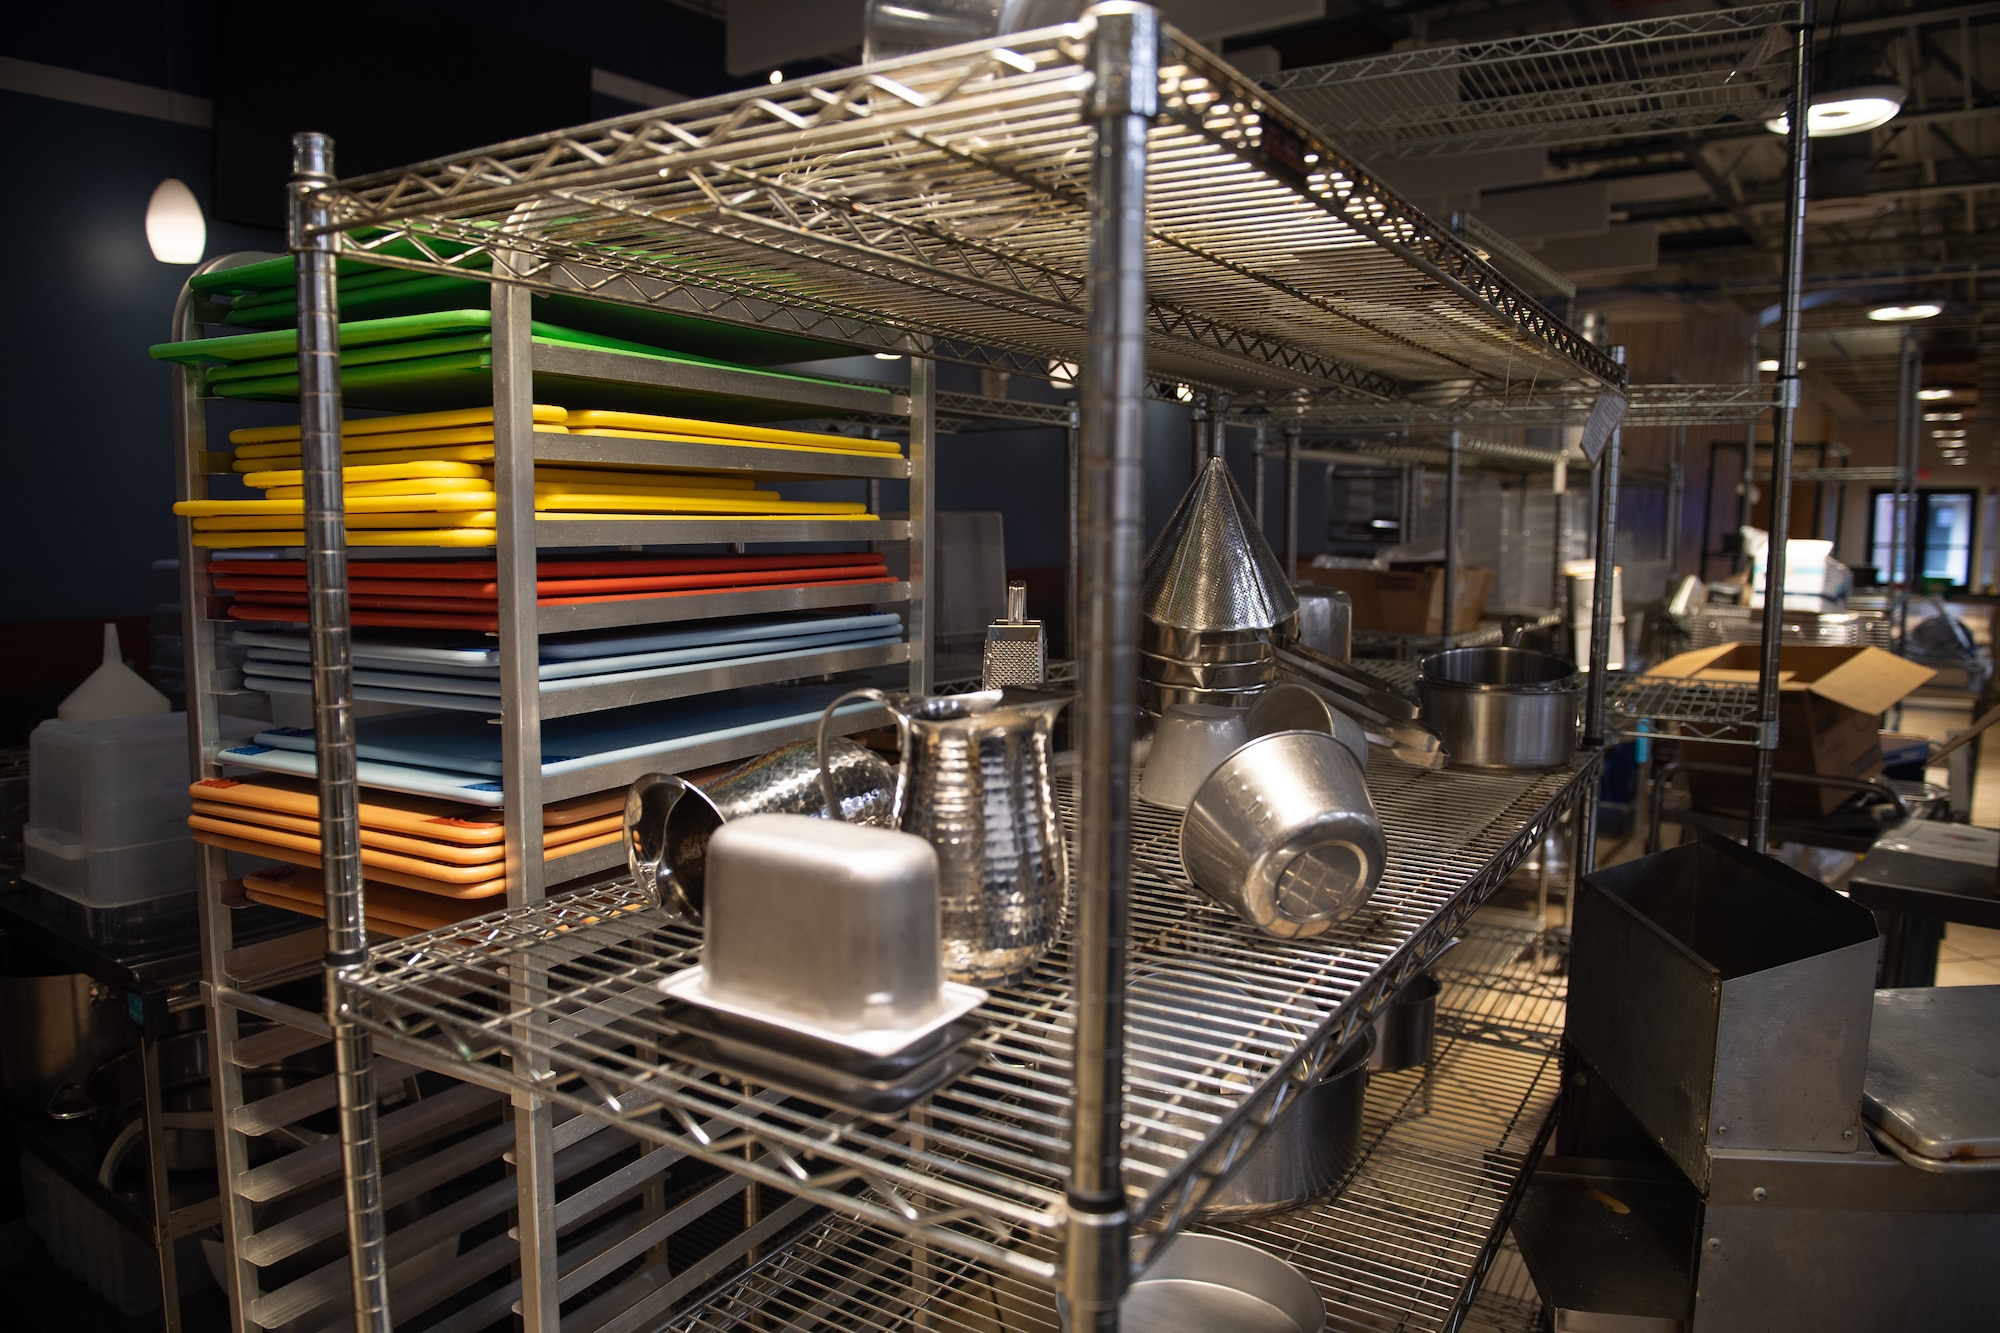 A photo of metal shelves stacked with colorful cutting boards and utensils.